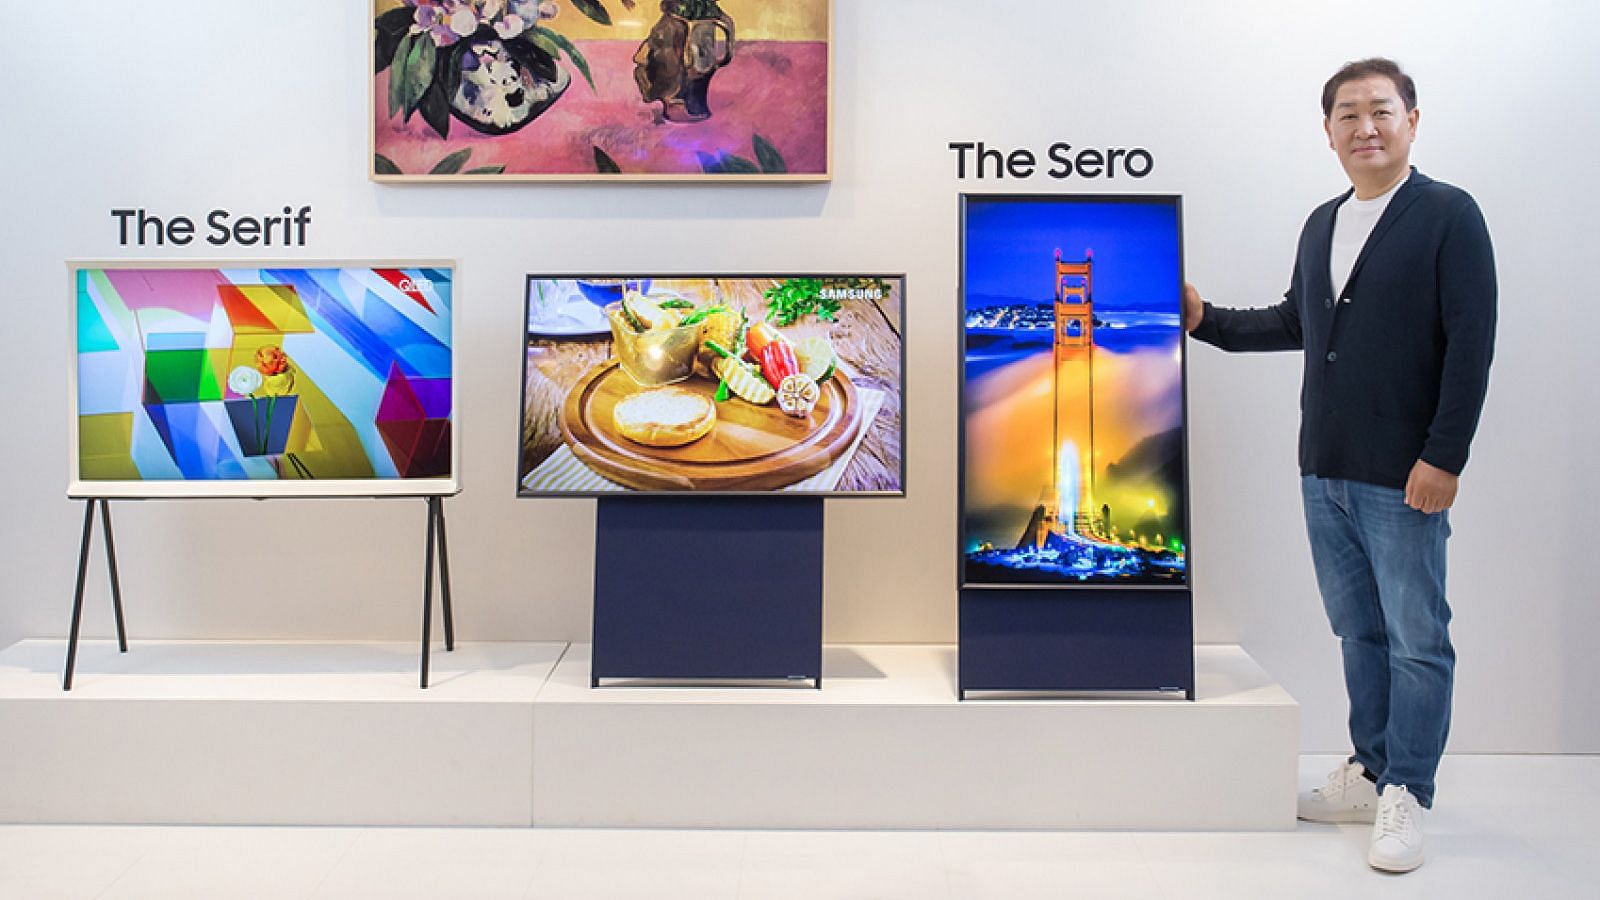 The Sero is a vertical TV that Samsung has launched in South Korea.